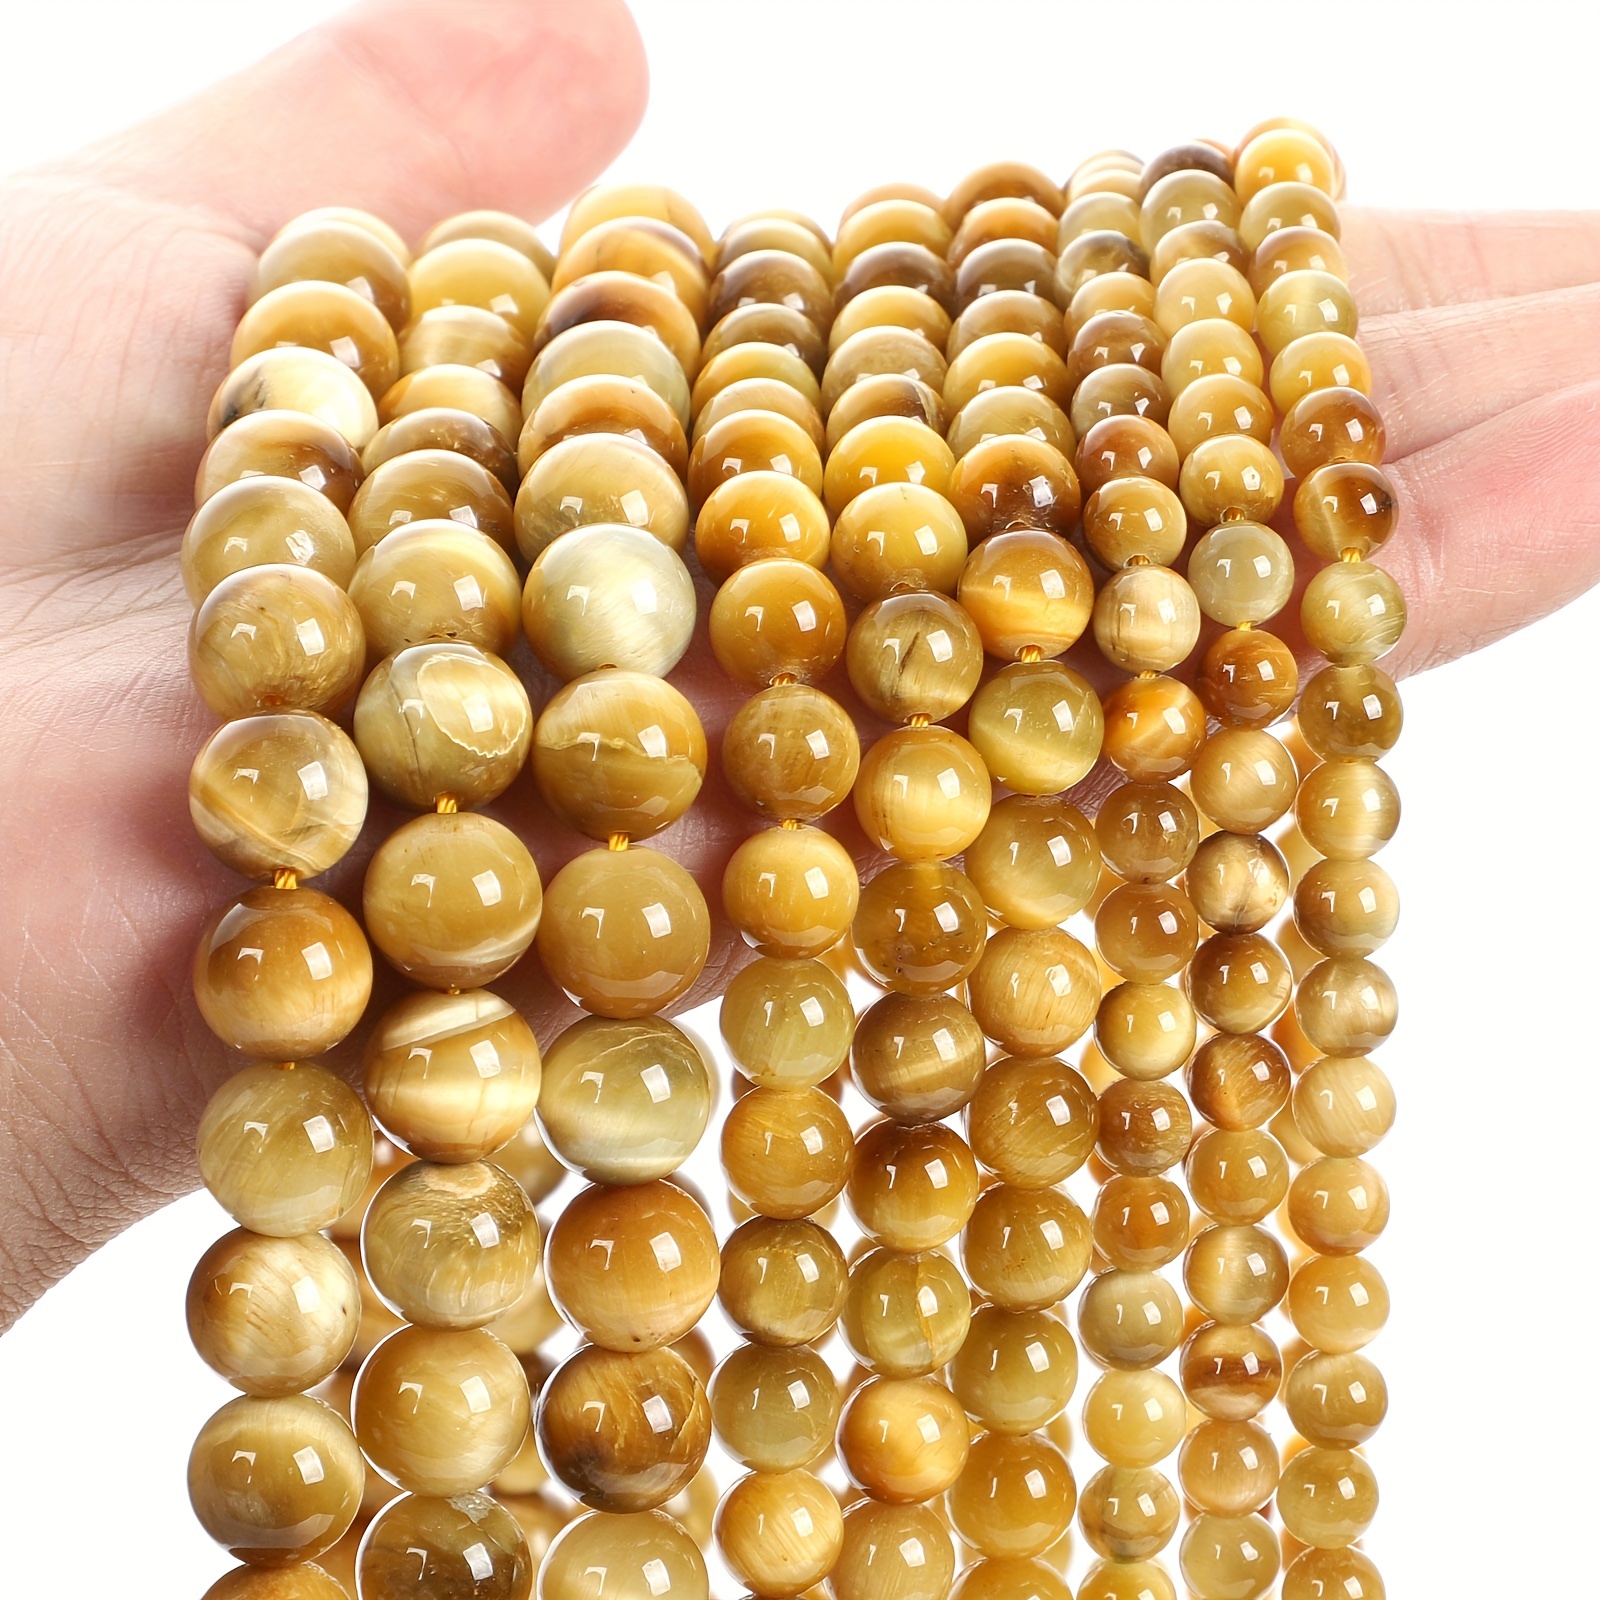 

4/6/8/10mm Aaa Golden Tiger Eye Natural Stone Charm Loose Beads For Jewelry Making Diy Necklace Bracelet Earrings Handmade Craft Supplies